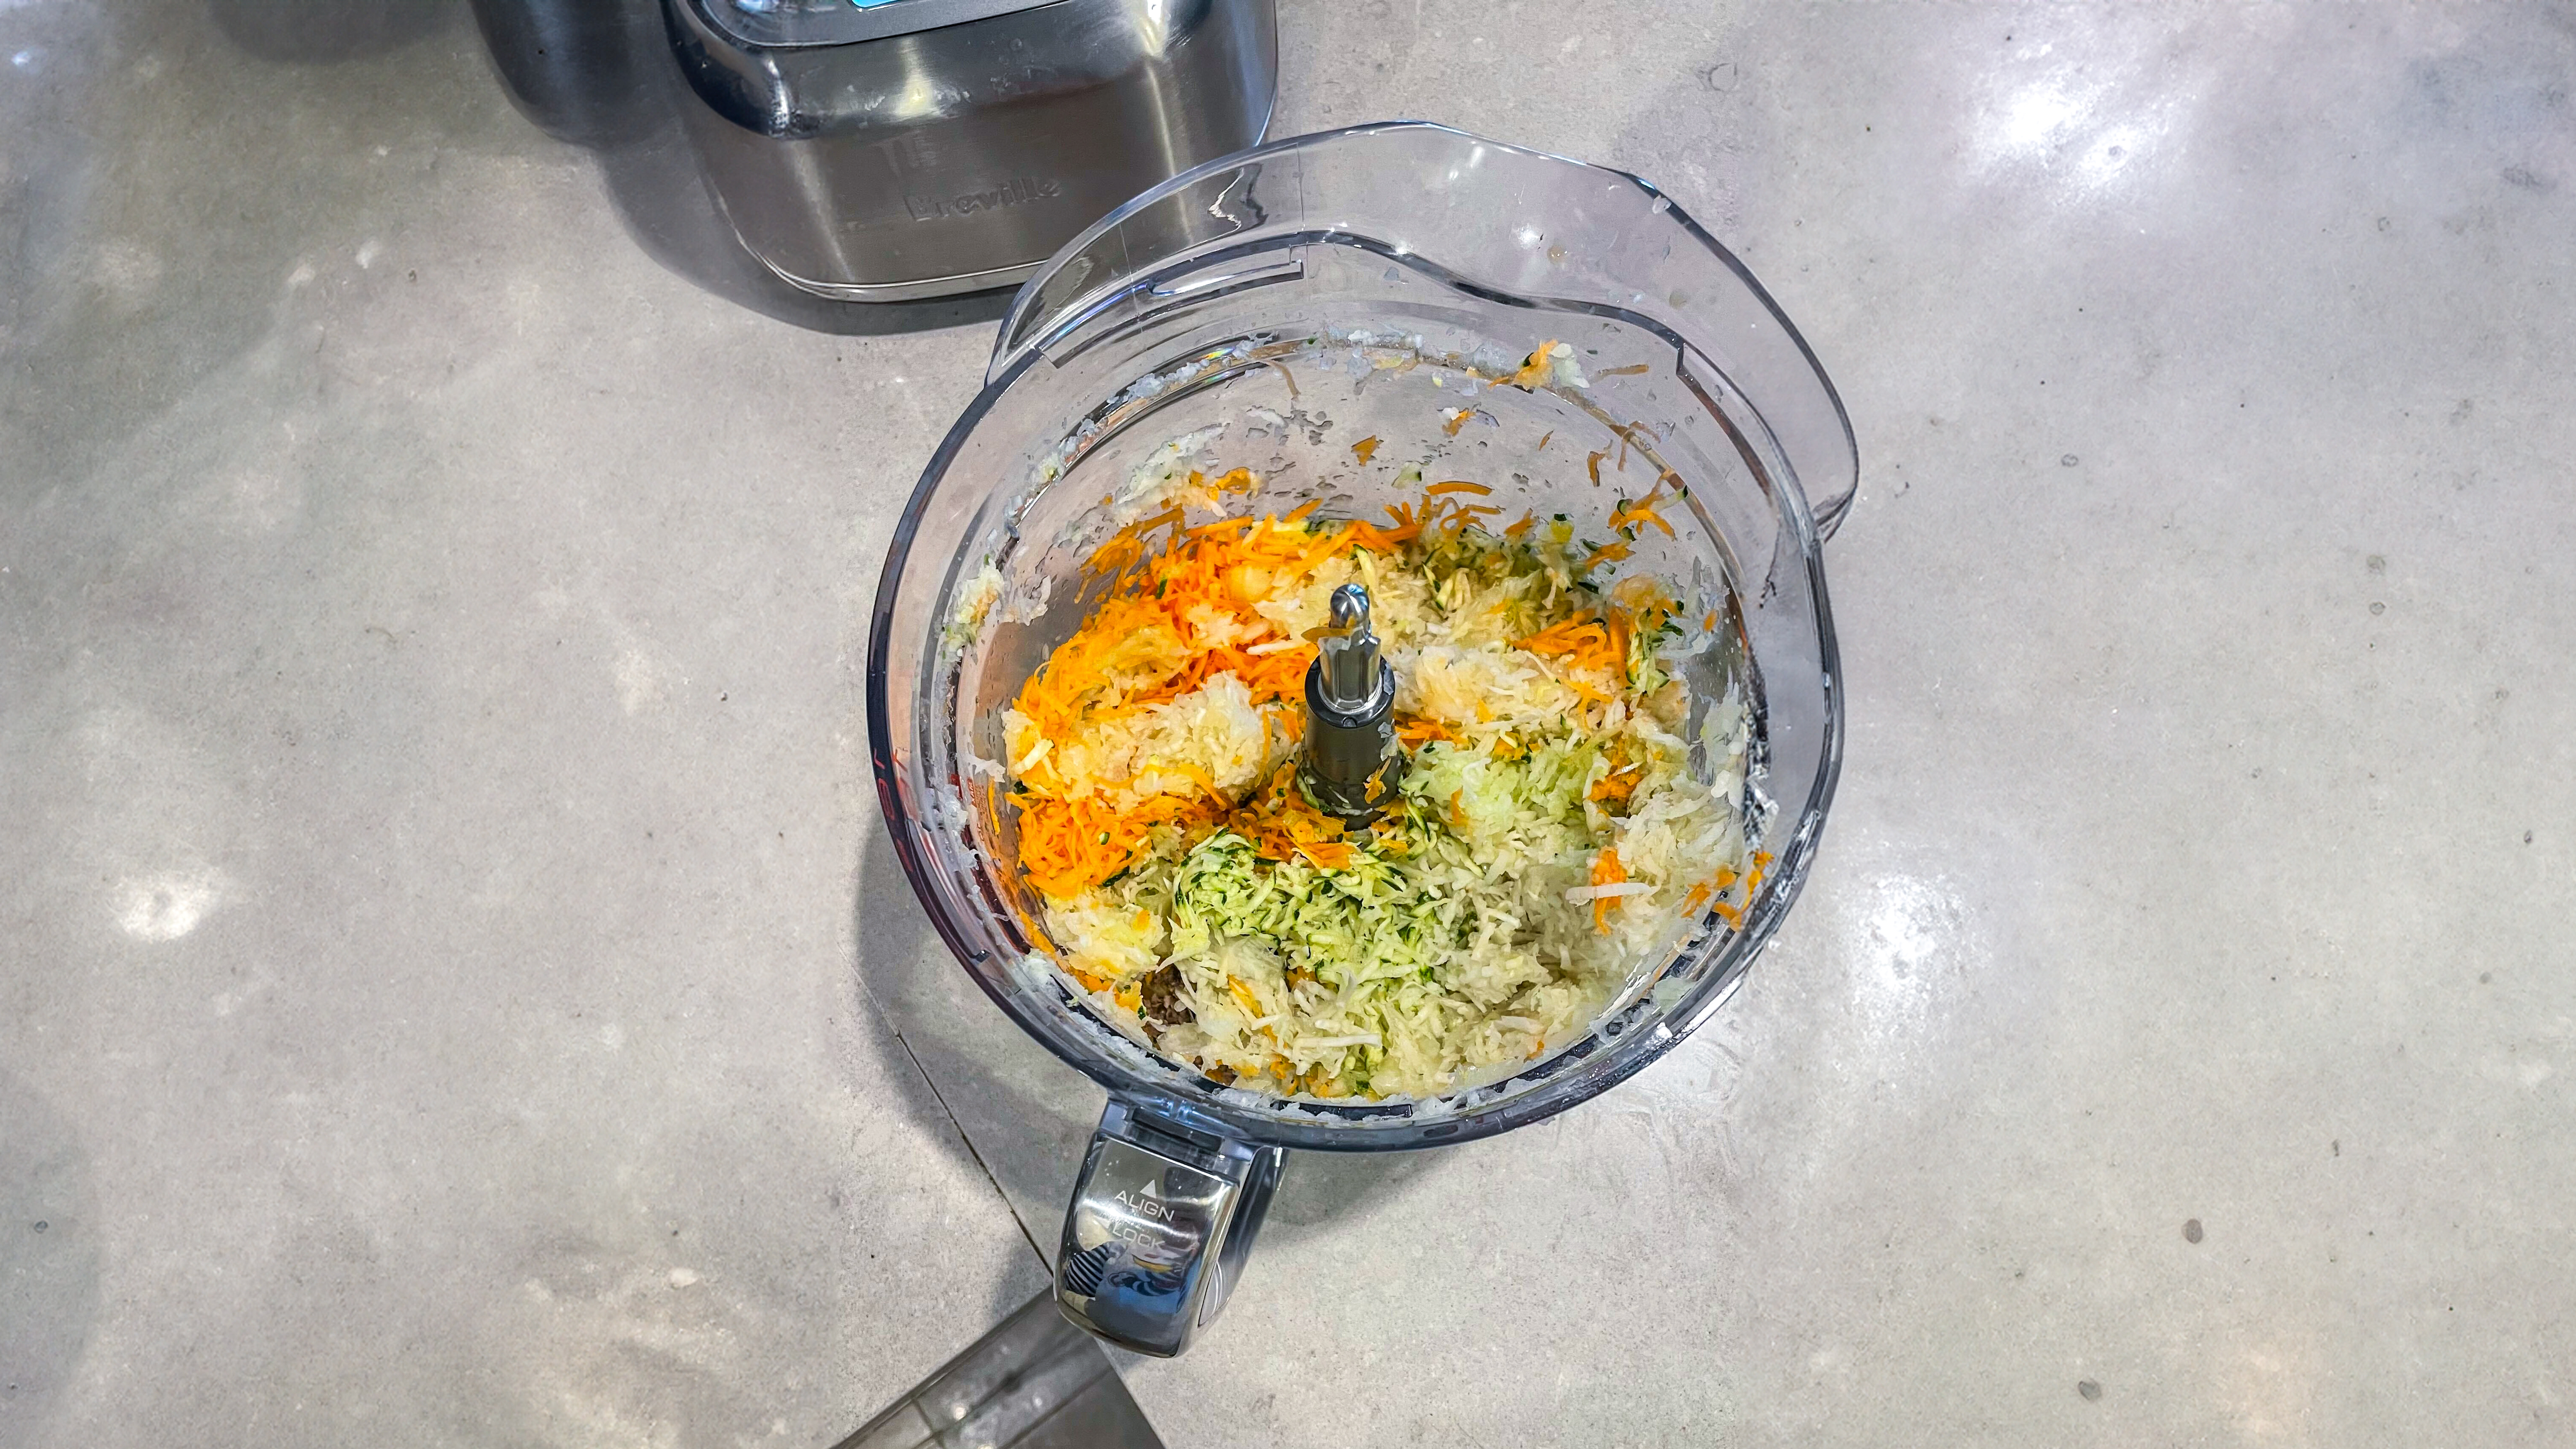 Grated mixed vegetables inside the bowl of the Breville Paradice 16